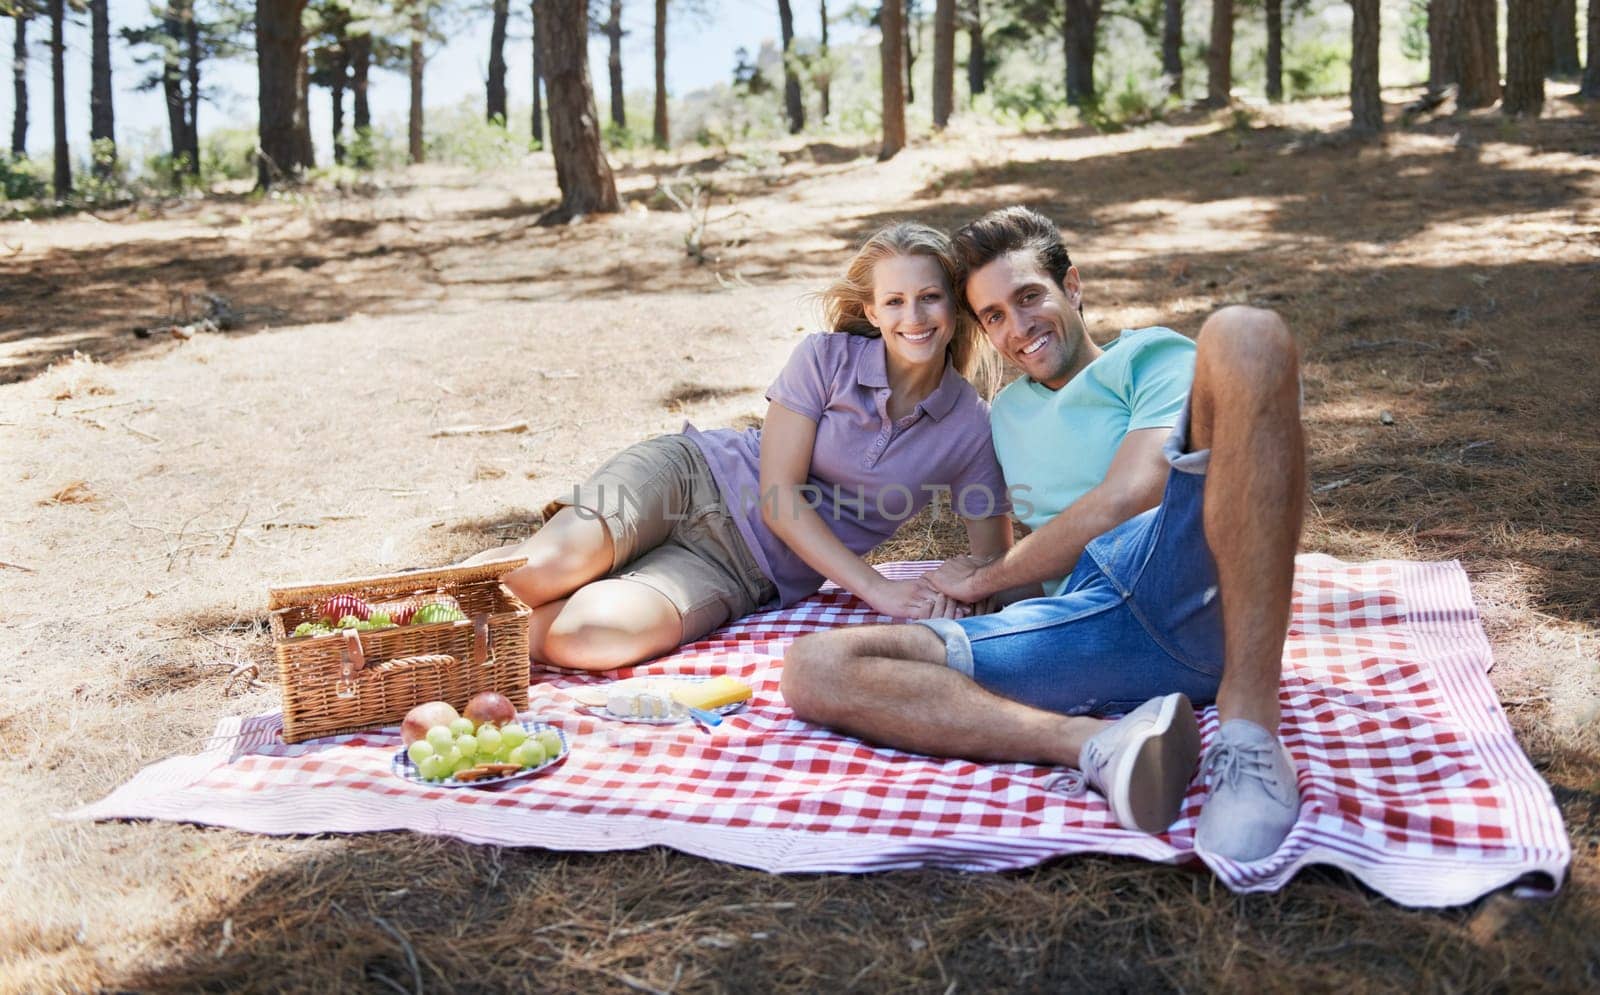 Enjoying the summer sun together. View of a happy young couple enjoying a summer picnic in the forest